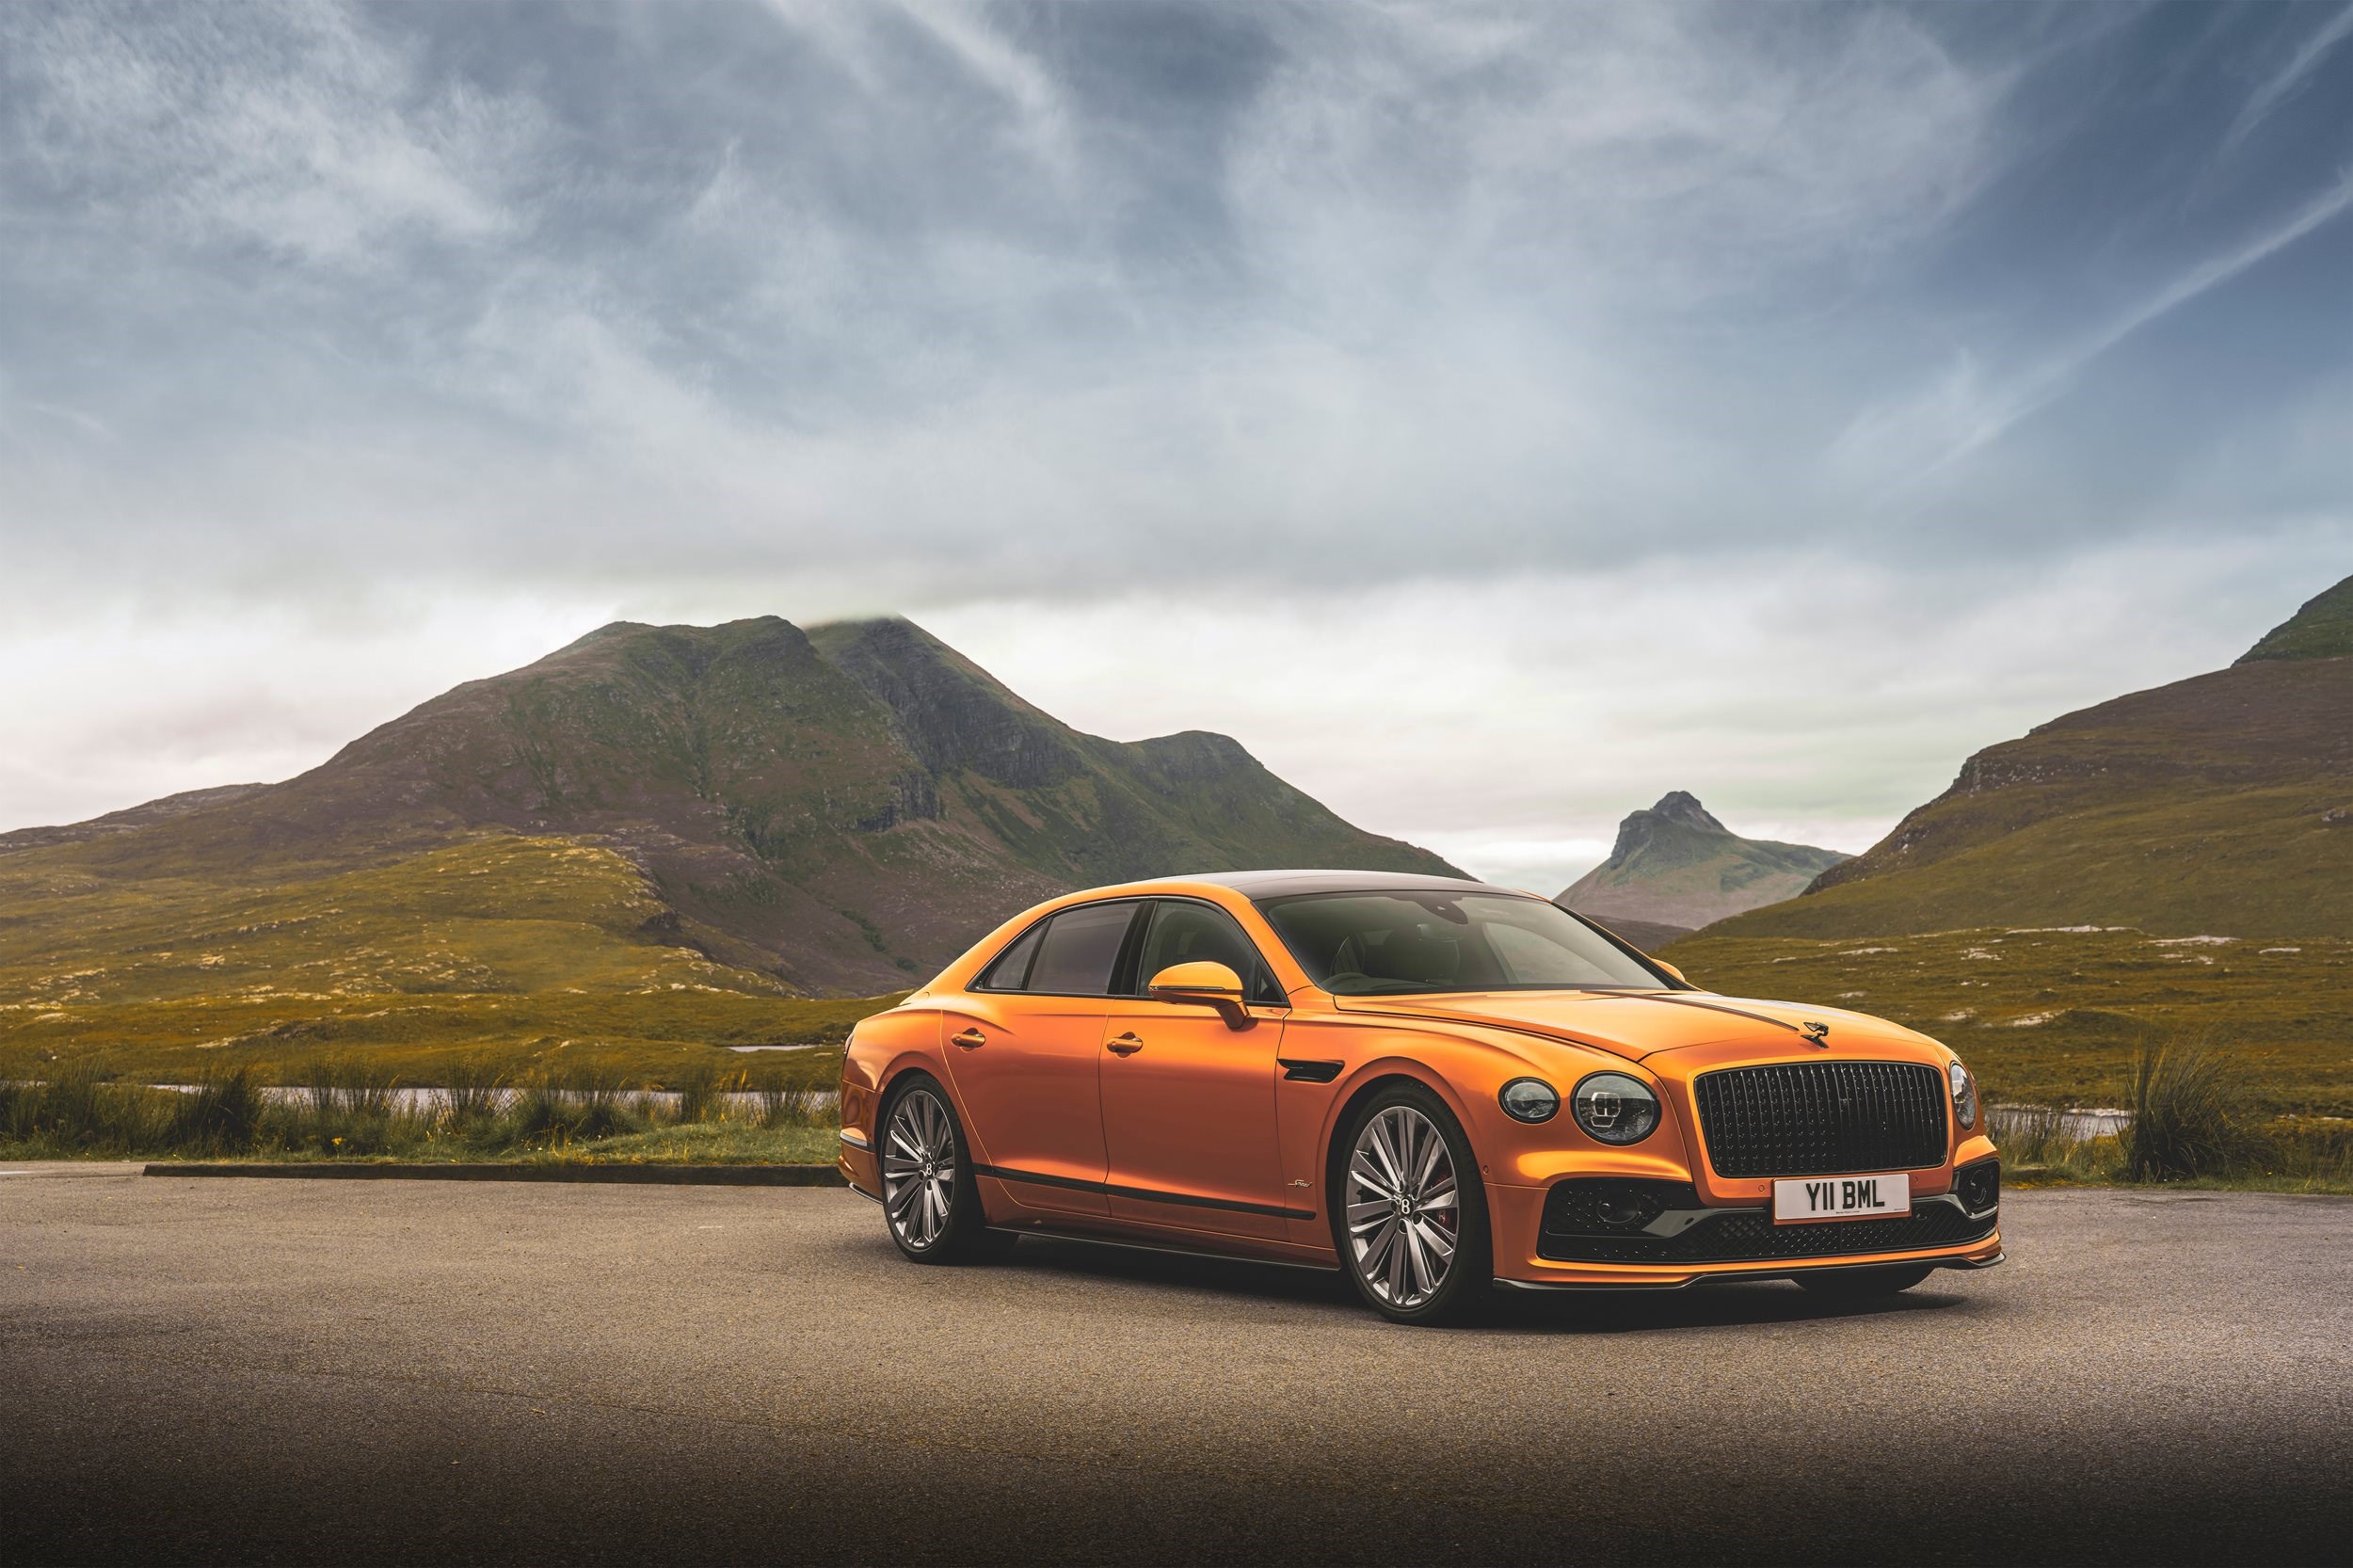 Colour , Orange Image type , Action Angle , Side/Profile Angle , Front 3/4 General , Performance General , Innovation General , Craftsmanship Corporate , Company Corporate , Beyond100 Current Models , Flying Spur , Flying Spur Speed Flying Spur Model Page Tag , Flying Spur Speed Model Page Tag 